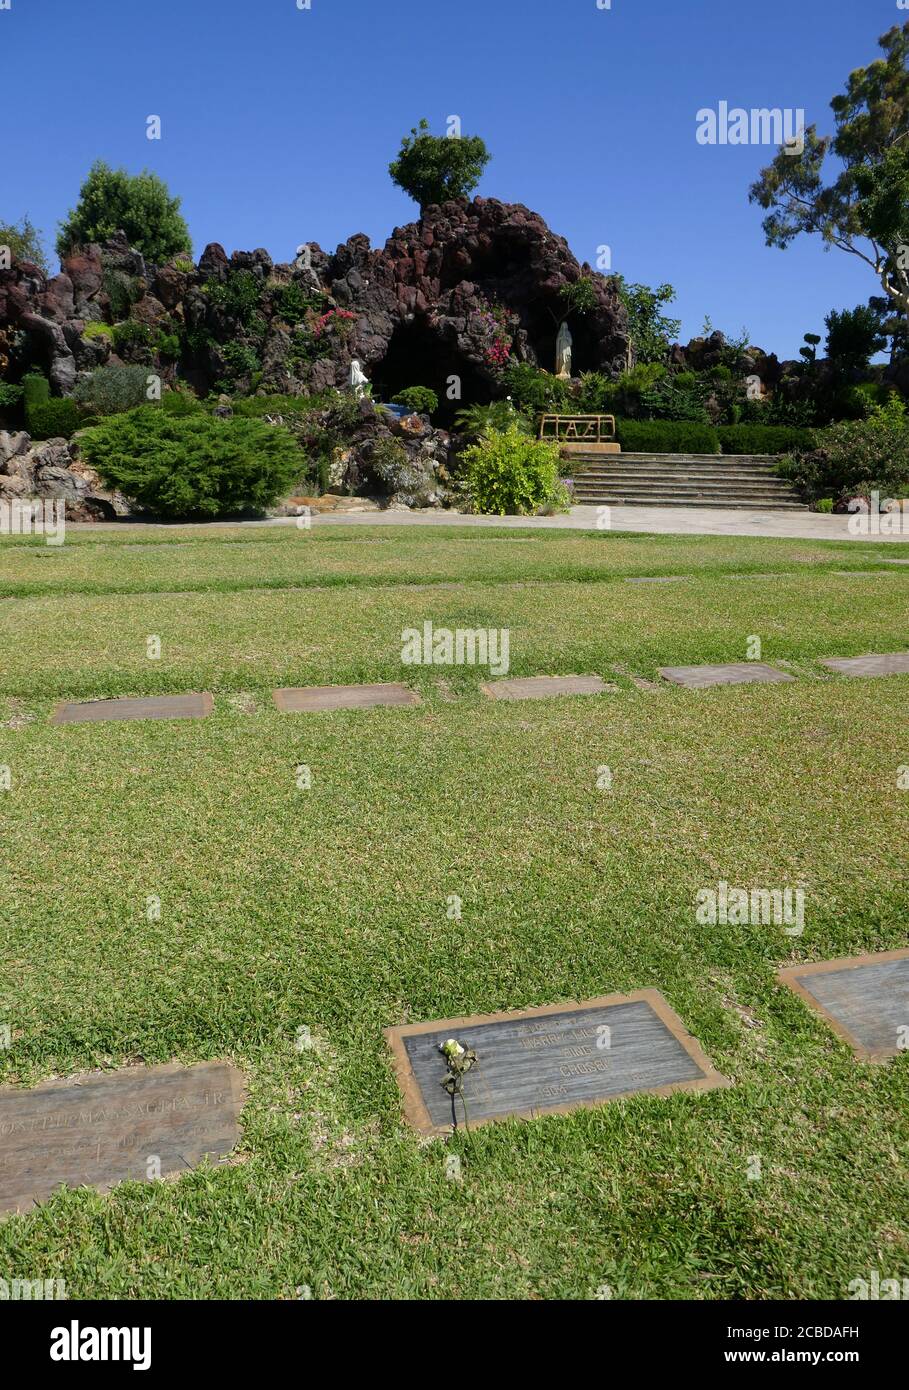 Culver City, California, USA 11th August 2020 A general view of atmosphere of Bing Crosby's Grave in Grotto Section at Holy Cross Cemetery on August 11, 2020 in Culver City, California, USA. Photo by Barry King/Alamy Stock Photo Stock Photo